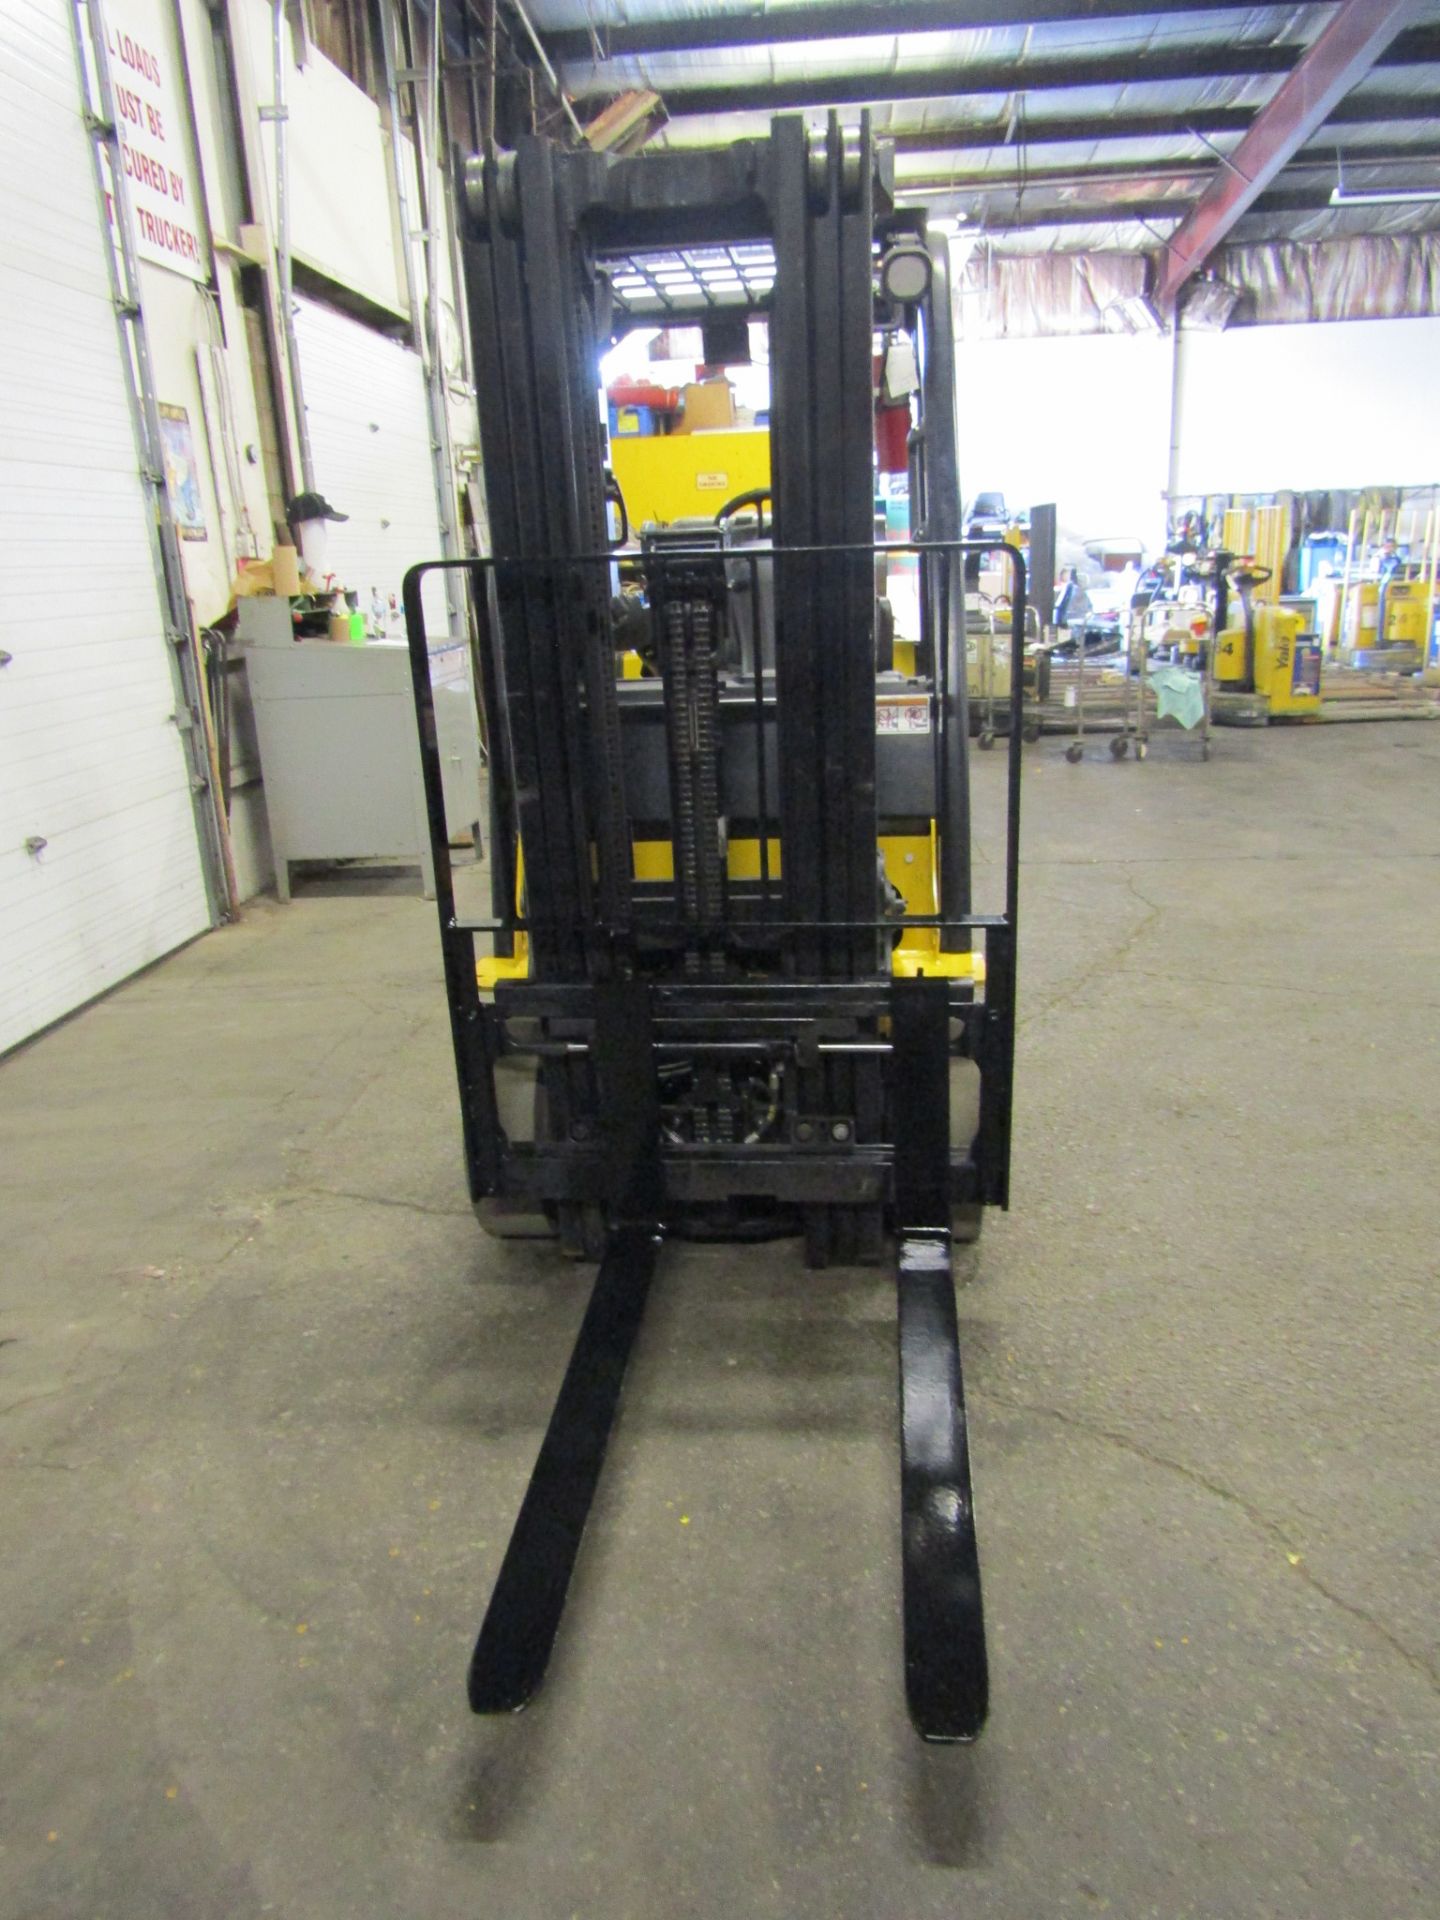 2012 Yale 5000lbs Capacity Forklift with 3-stage mast - LPG (propane) with sideshift (no propane - Image 2 of 2